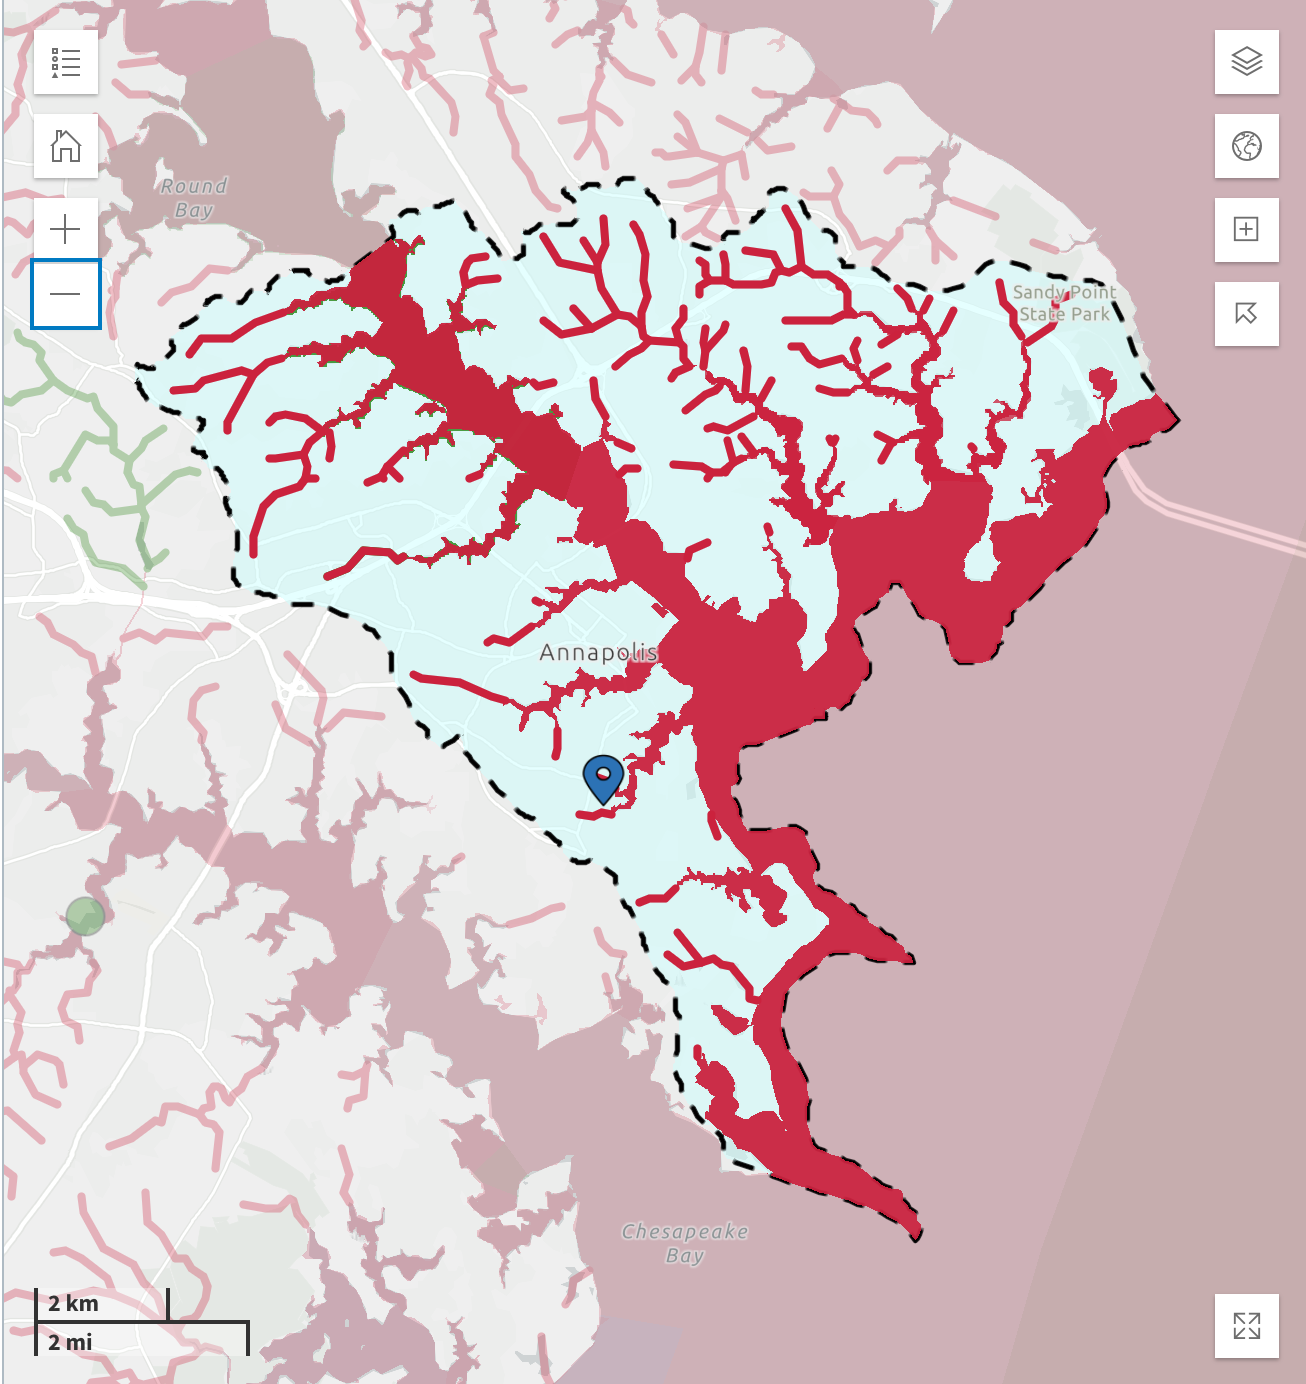 Watershed map where the central river and all the tributary streams are red